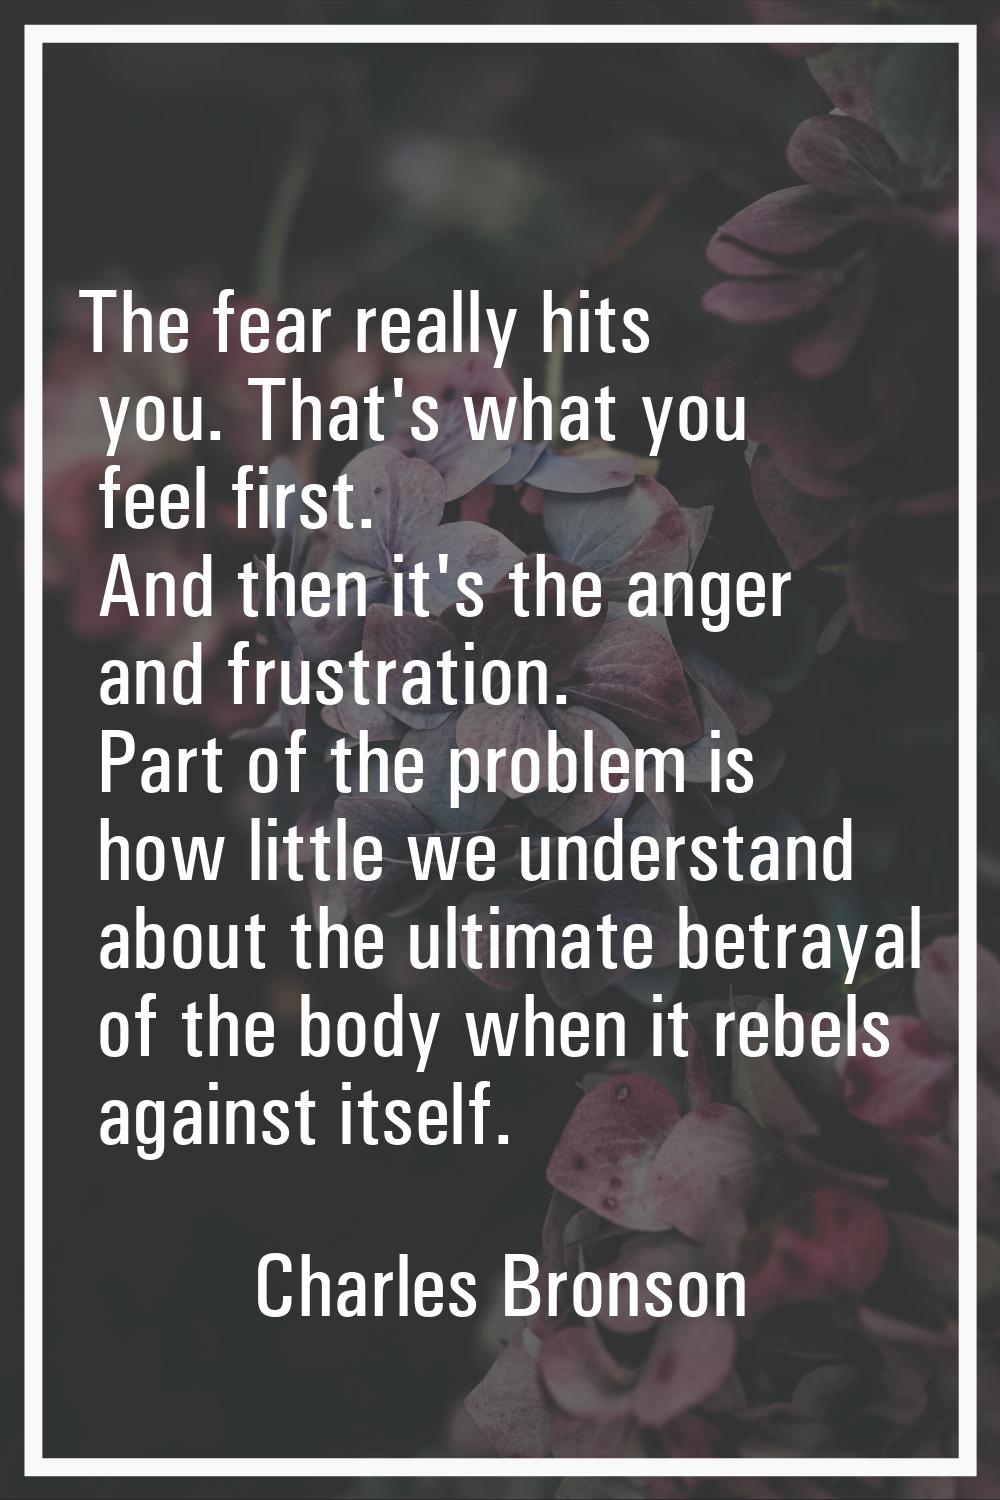 The fear really hits you. That's what you feel first. And then it's the anger and frustration. Part